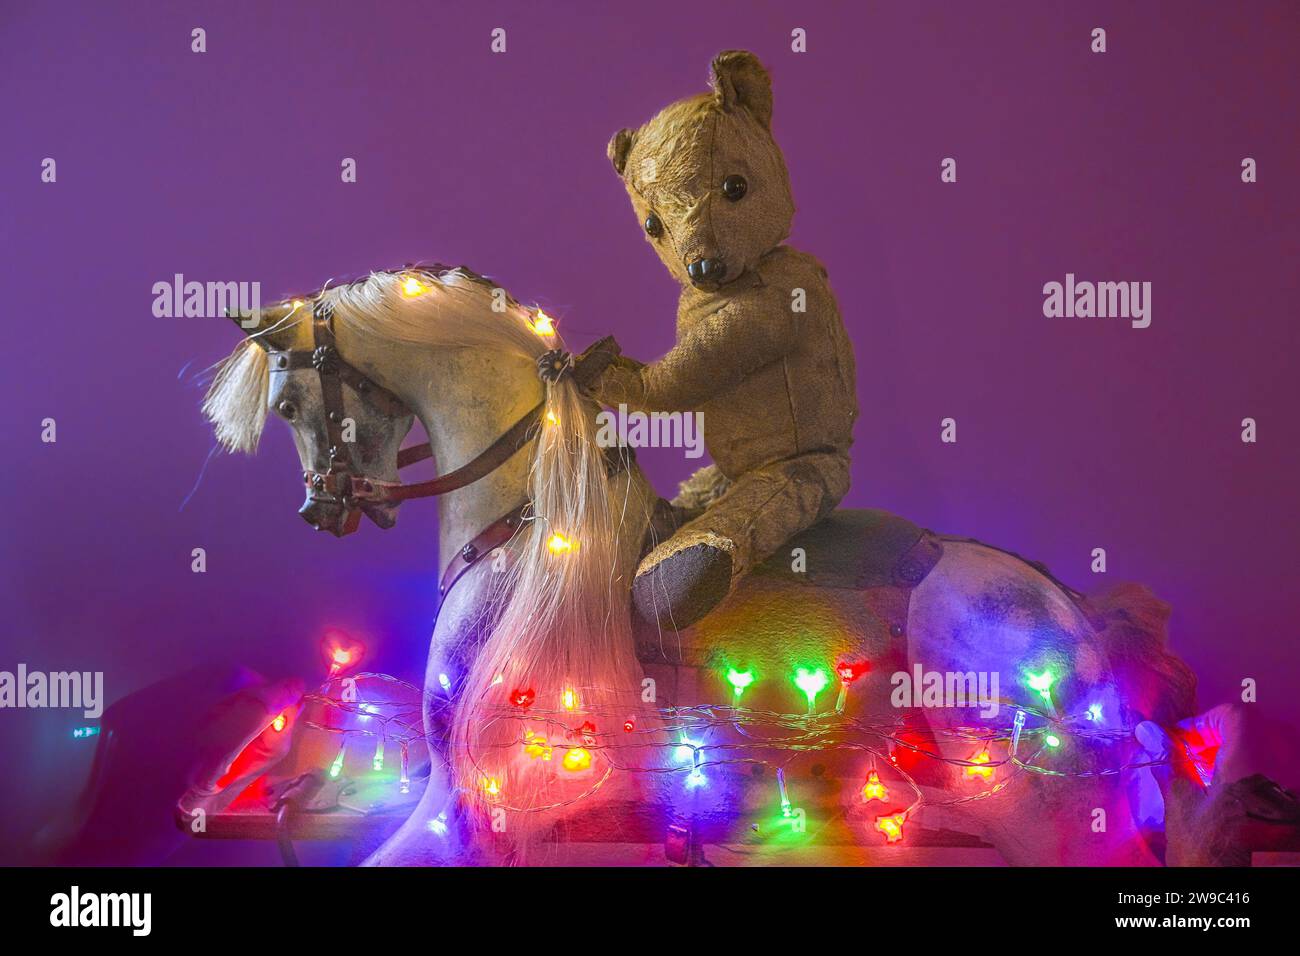 Teddy bear riding traditional wooden Rocking Horse with horsehair mane, Stock Photo